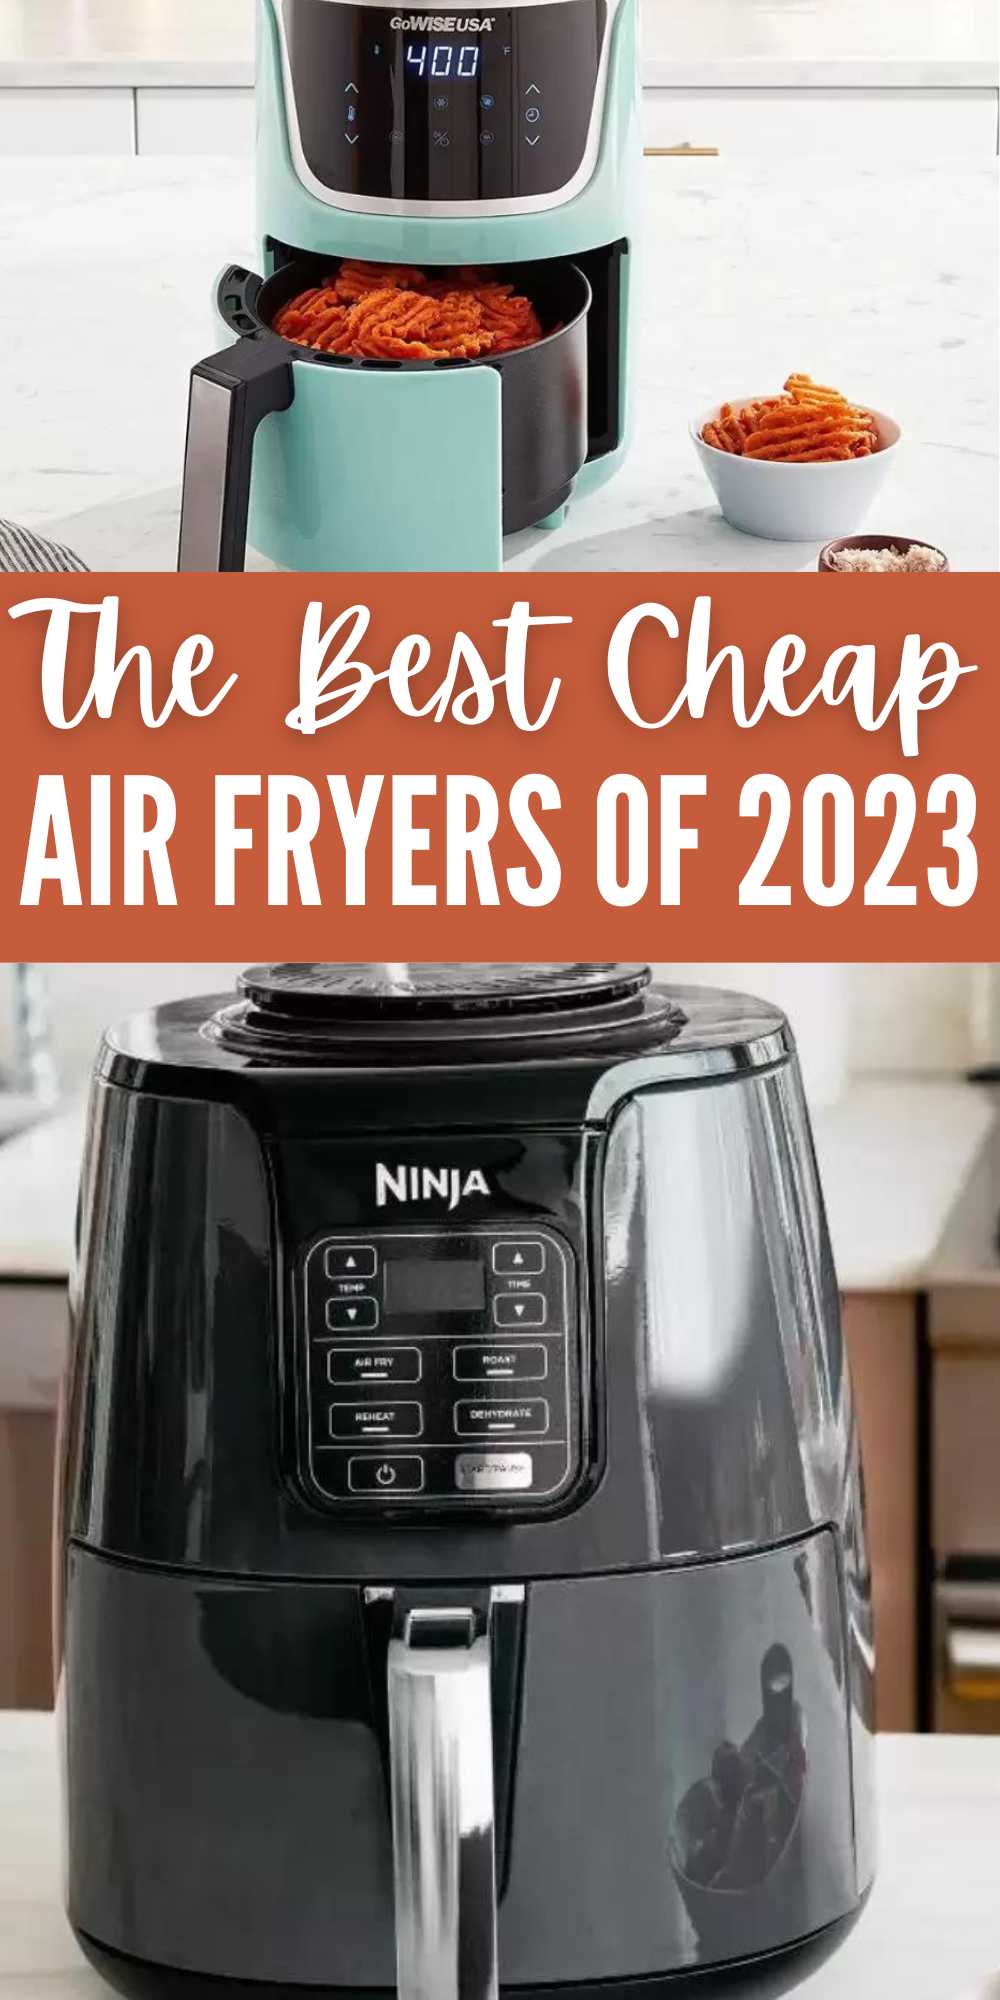 Whats The Best Air Fryers for 2023 - The Jerusalem Post